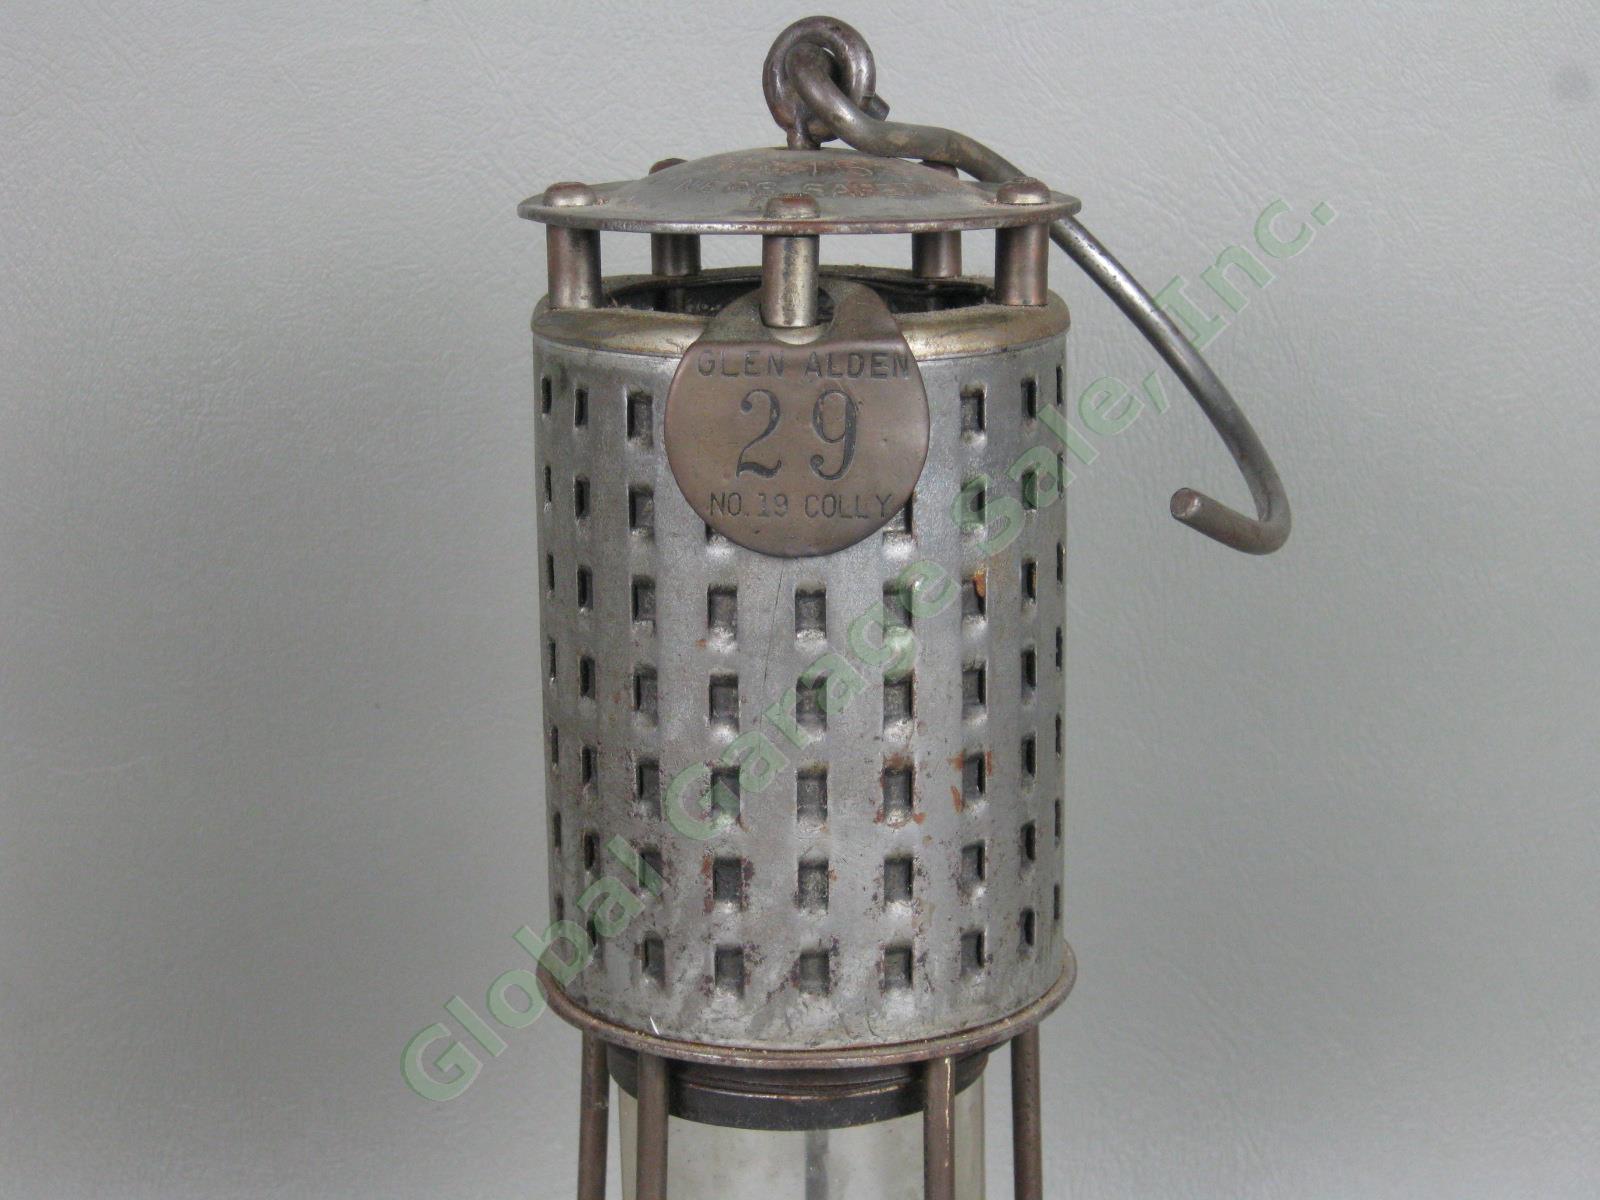 Vtg Permissible 201 Miners Safety Lamp Glen Alden Coal Co 29 No 19 Colly Tag NR! 1